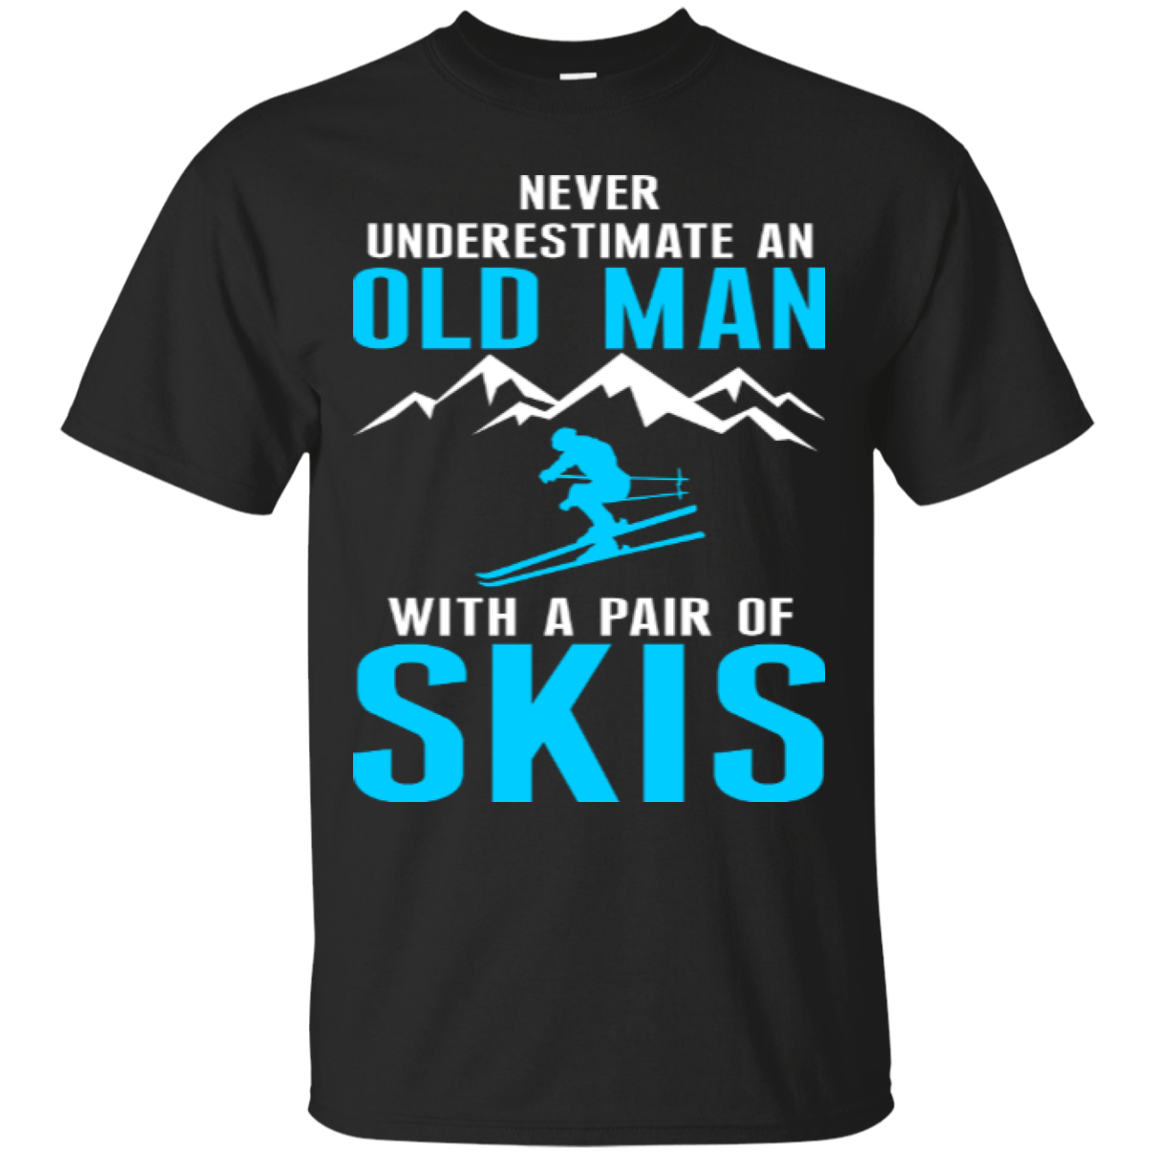 Never Underestimate An Old Man With A Pair Of Skis Tees - Powderaddicts